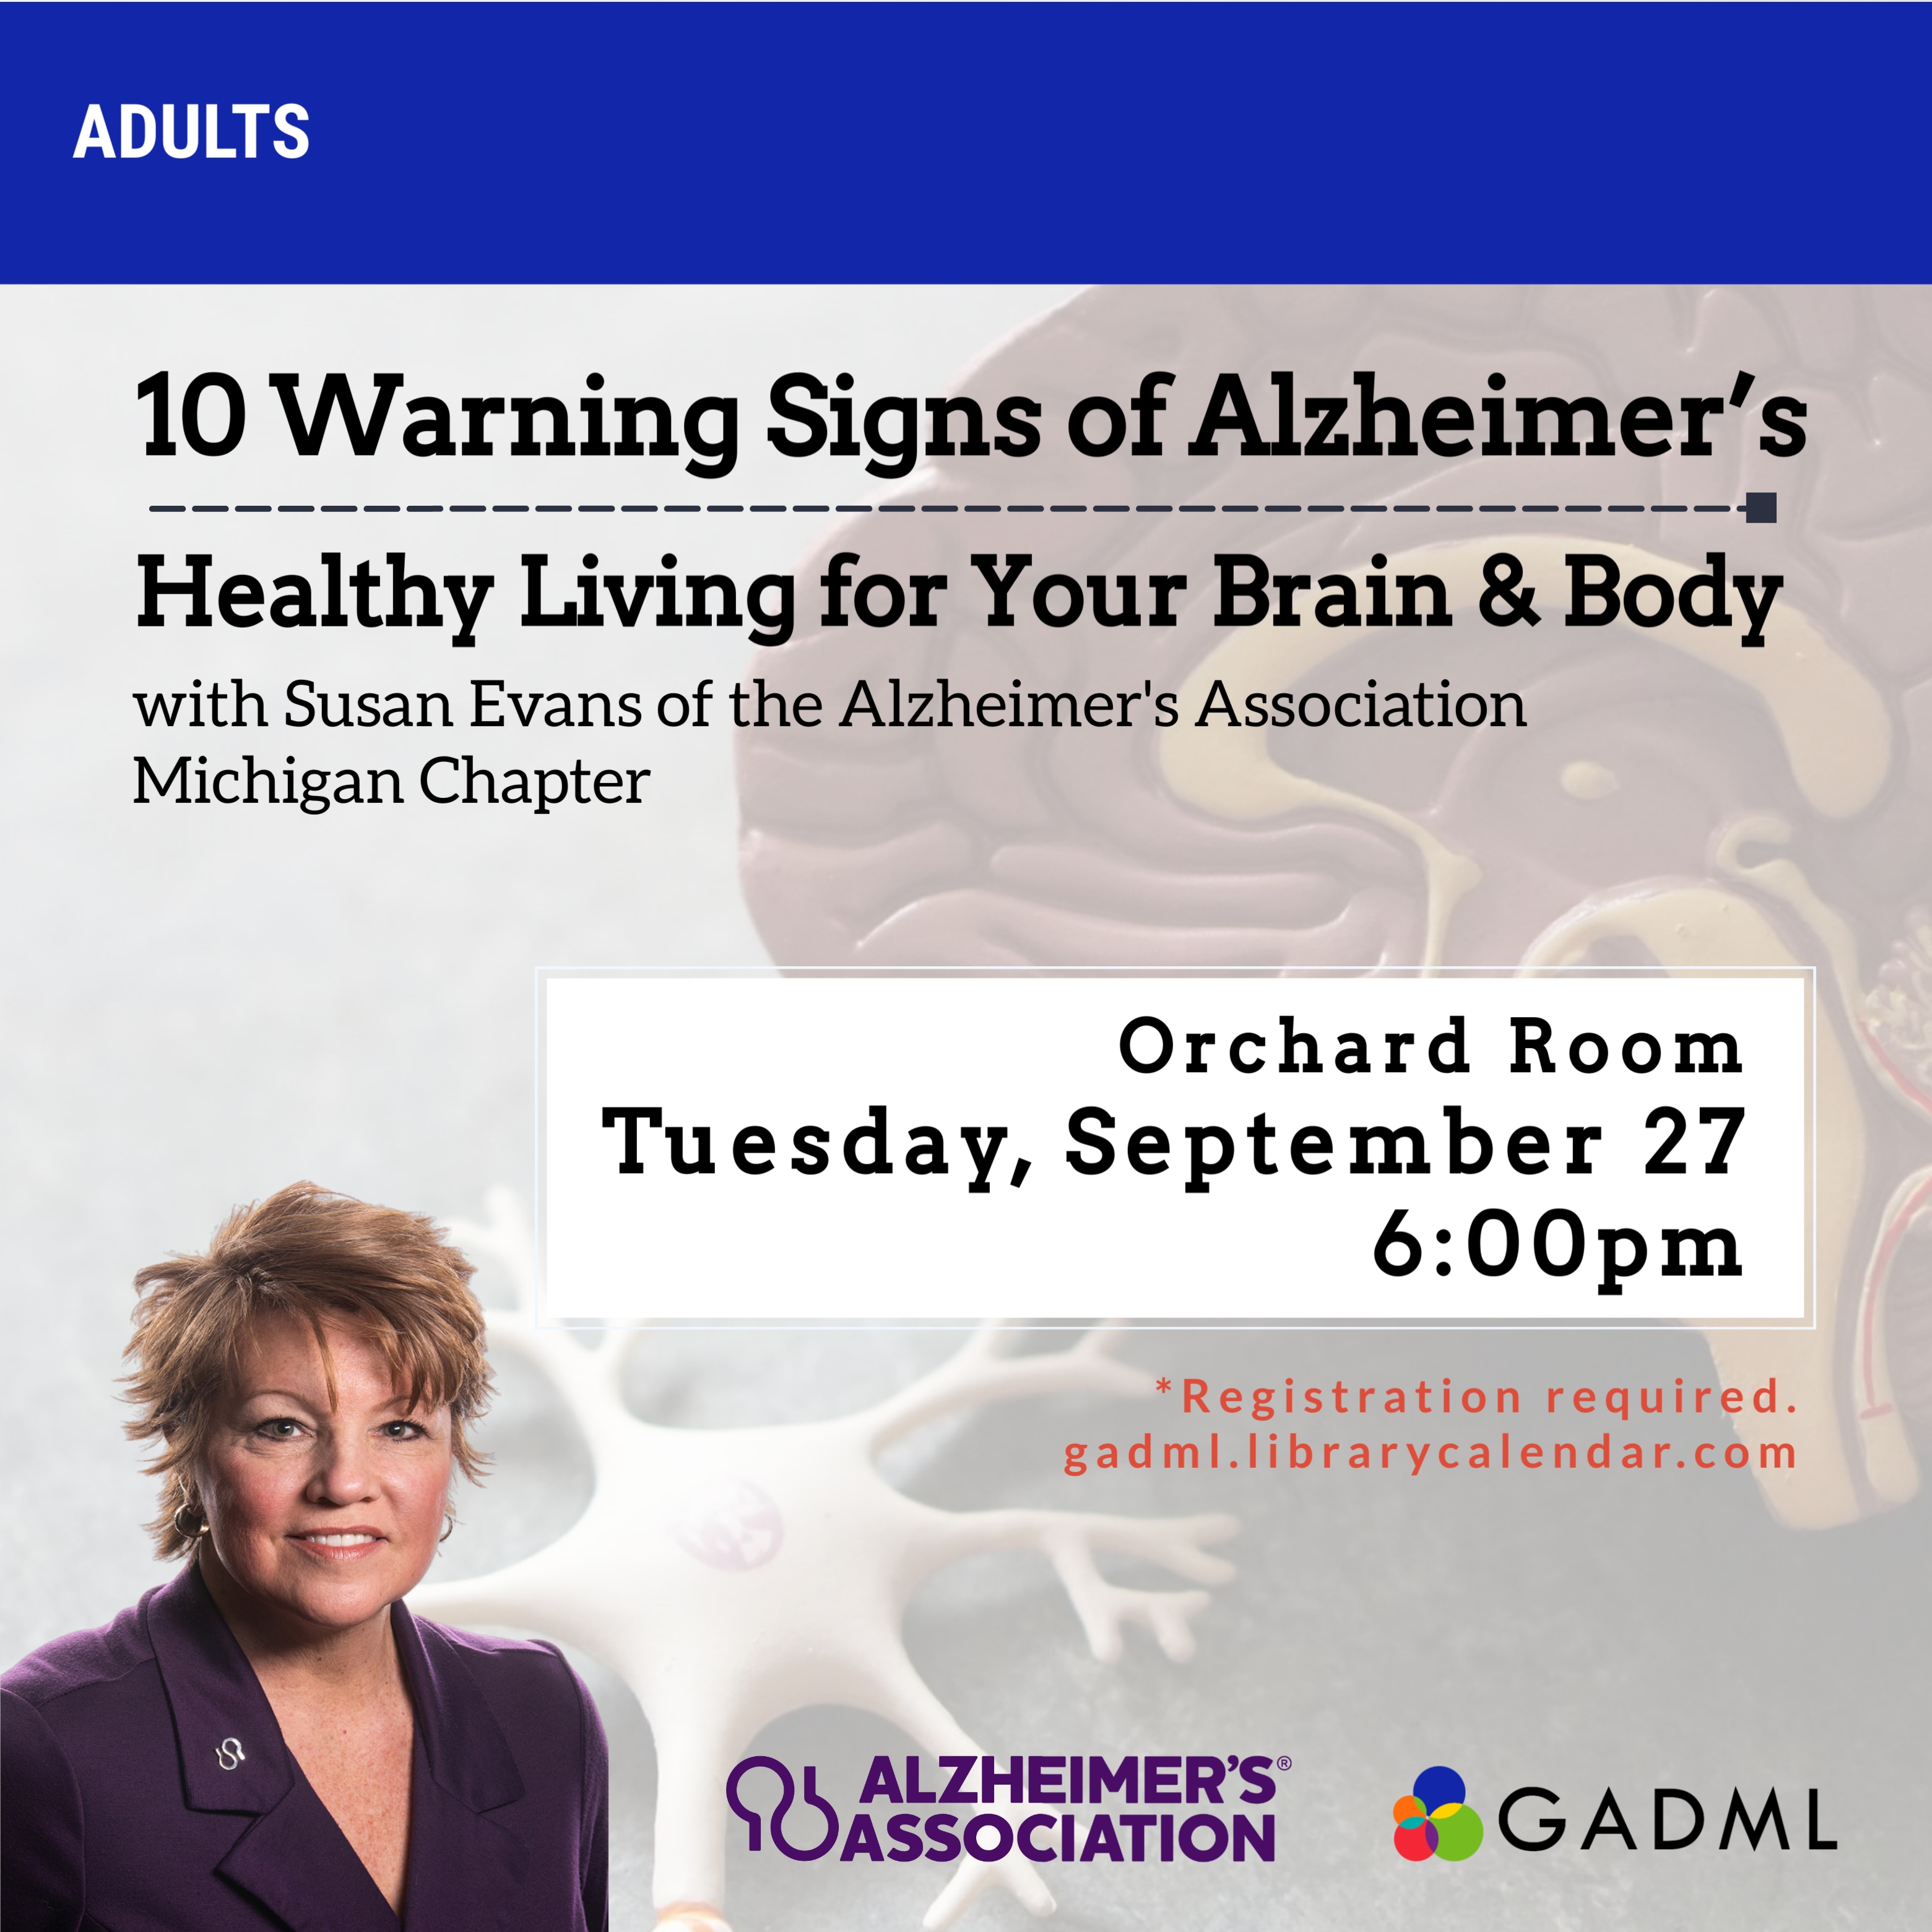 10 warning signs of alzheimers September 27 at 6pm